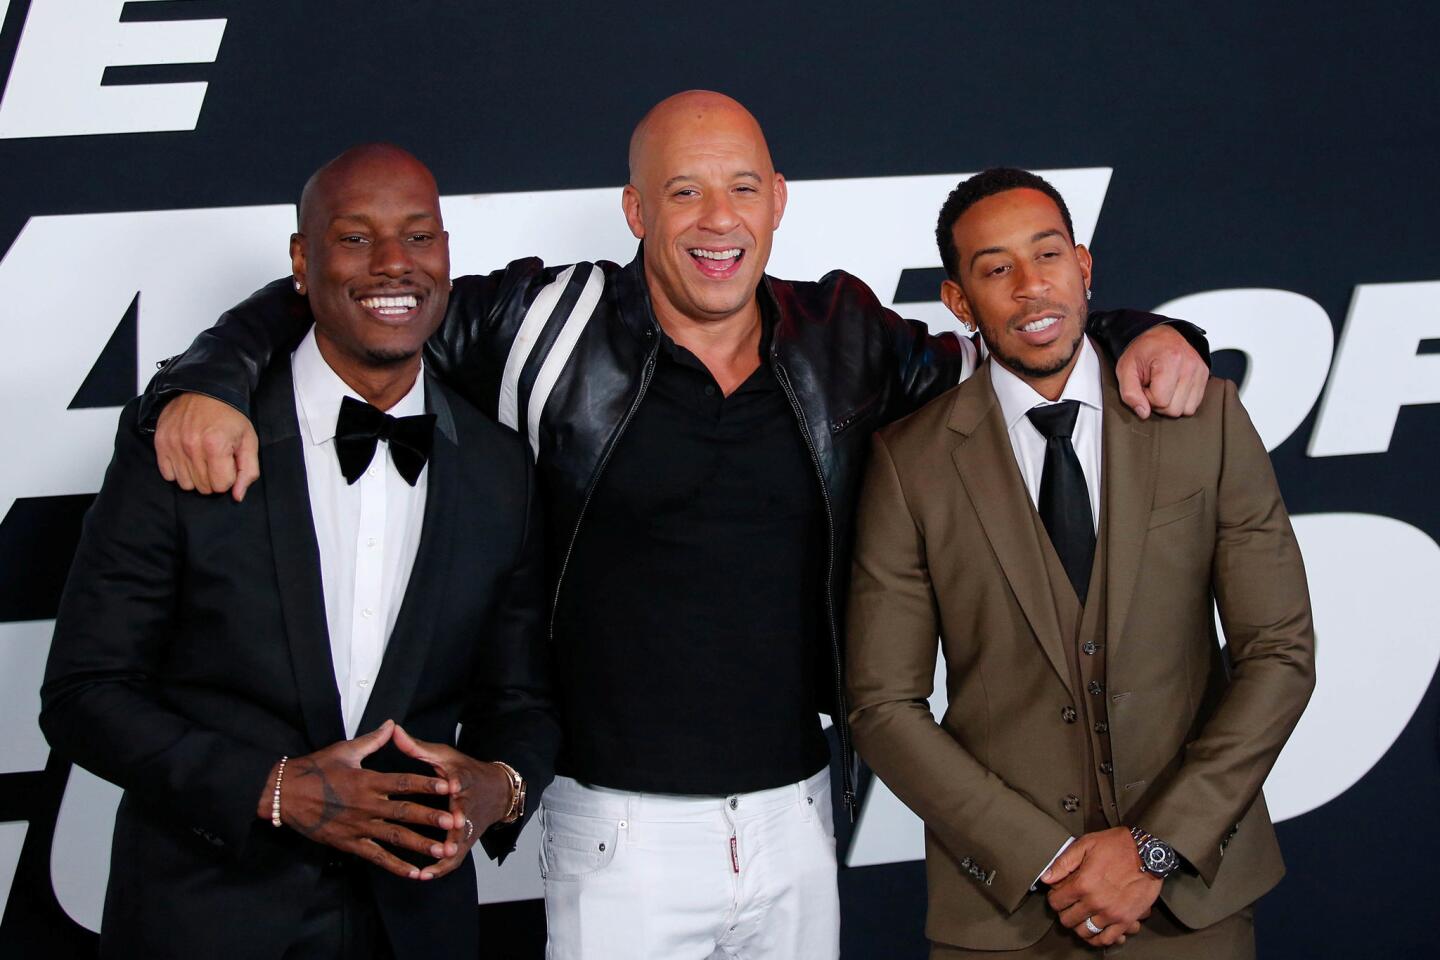 Actors Tyrese Gibson, Vin Diesel and Ludacris attend 'The Fate Of The Furious' New York premiere at Radio City Music Hall in New York